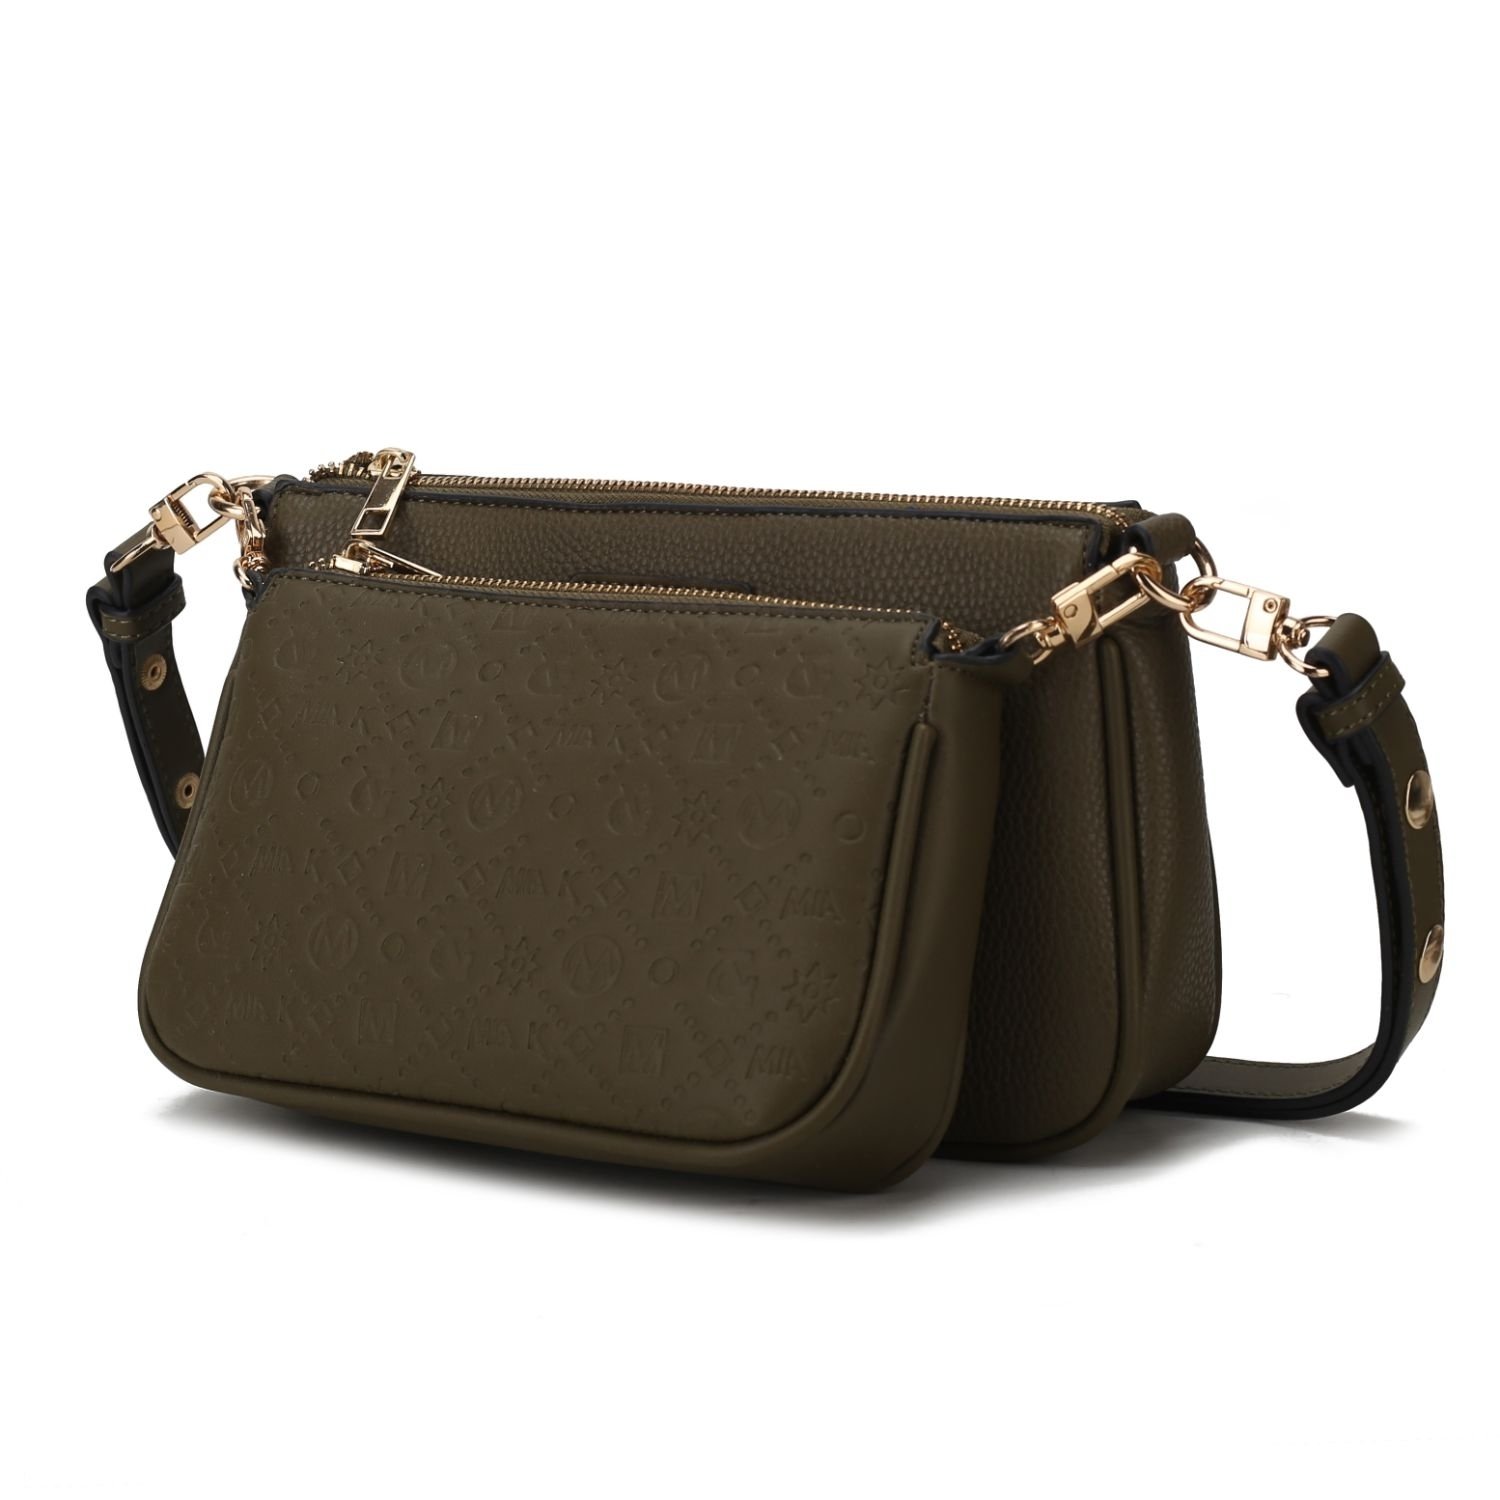 MKF Collection Dayla Vegan Leather Women's Shoulder Bag By Mia K -2 Pieces - Olive